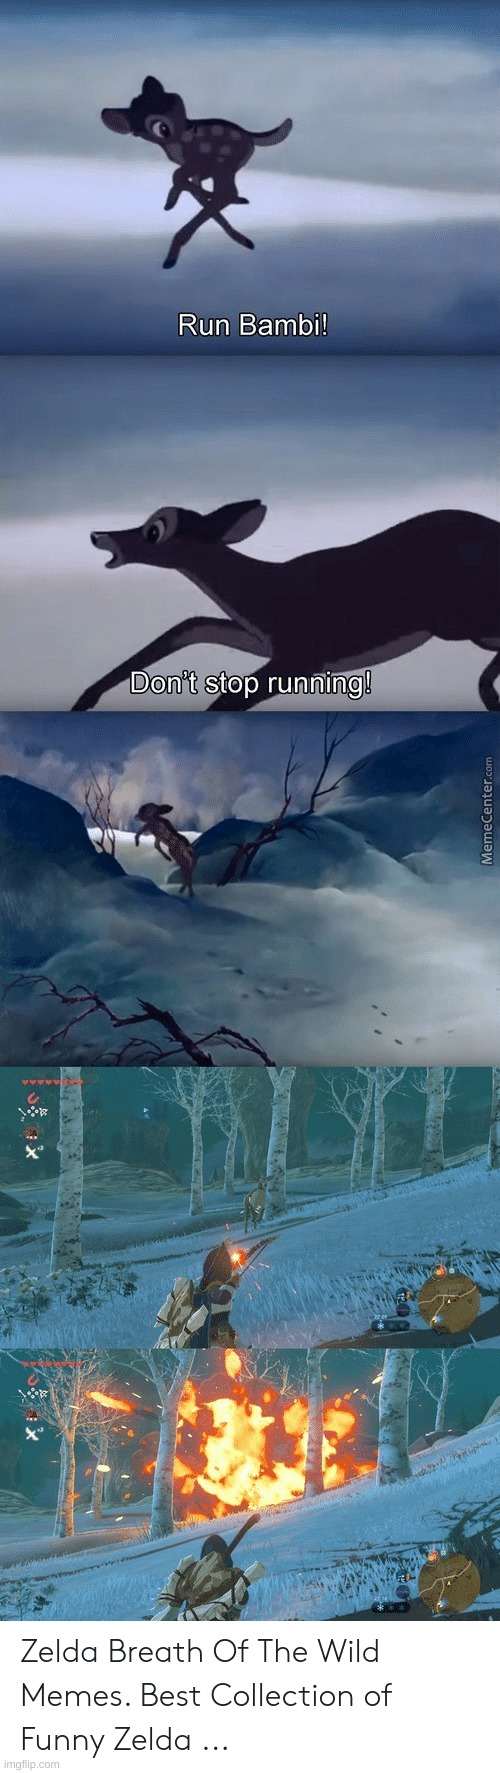 BAMBI NO!! | image tagged in the legend of zelda breath of the wild,link,bambi,deer | made w/ Imgflip meme maker